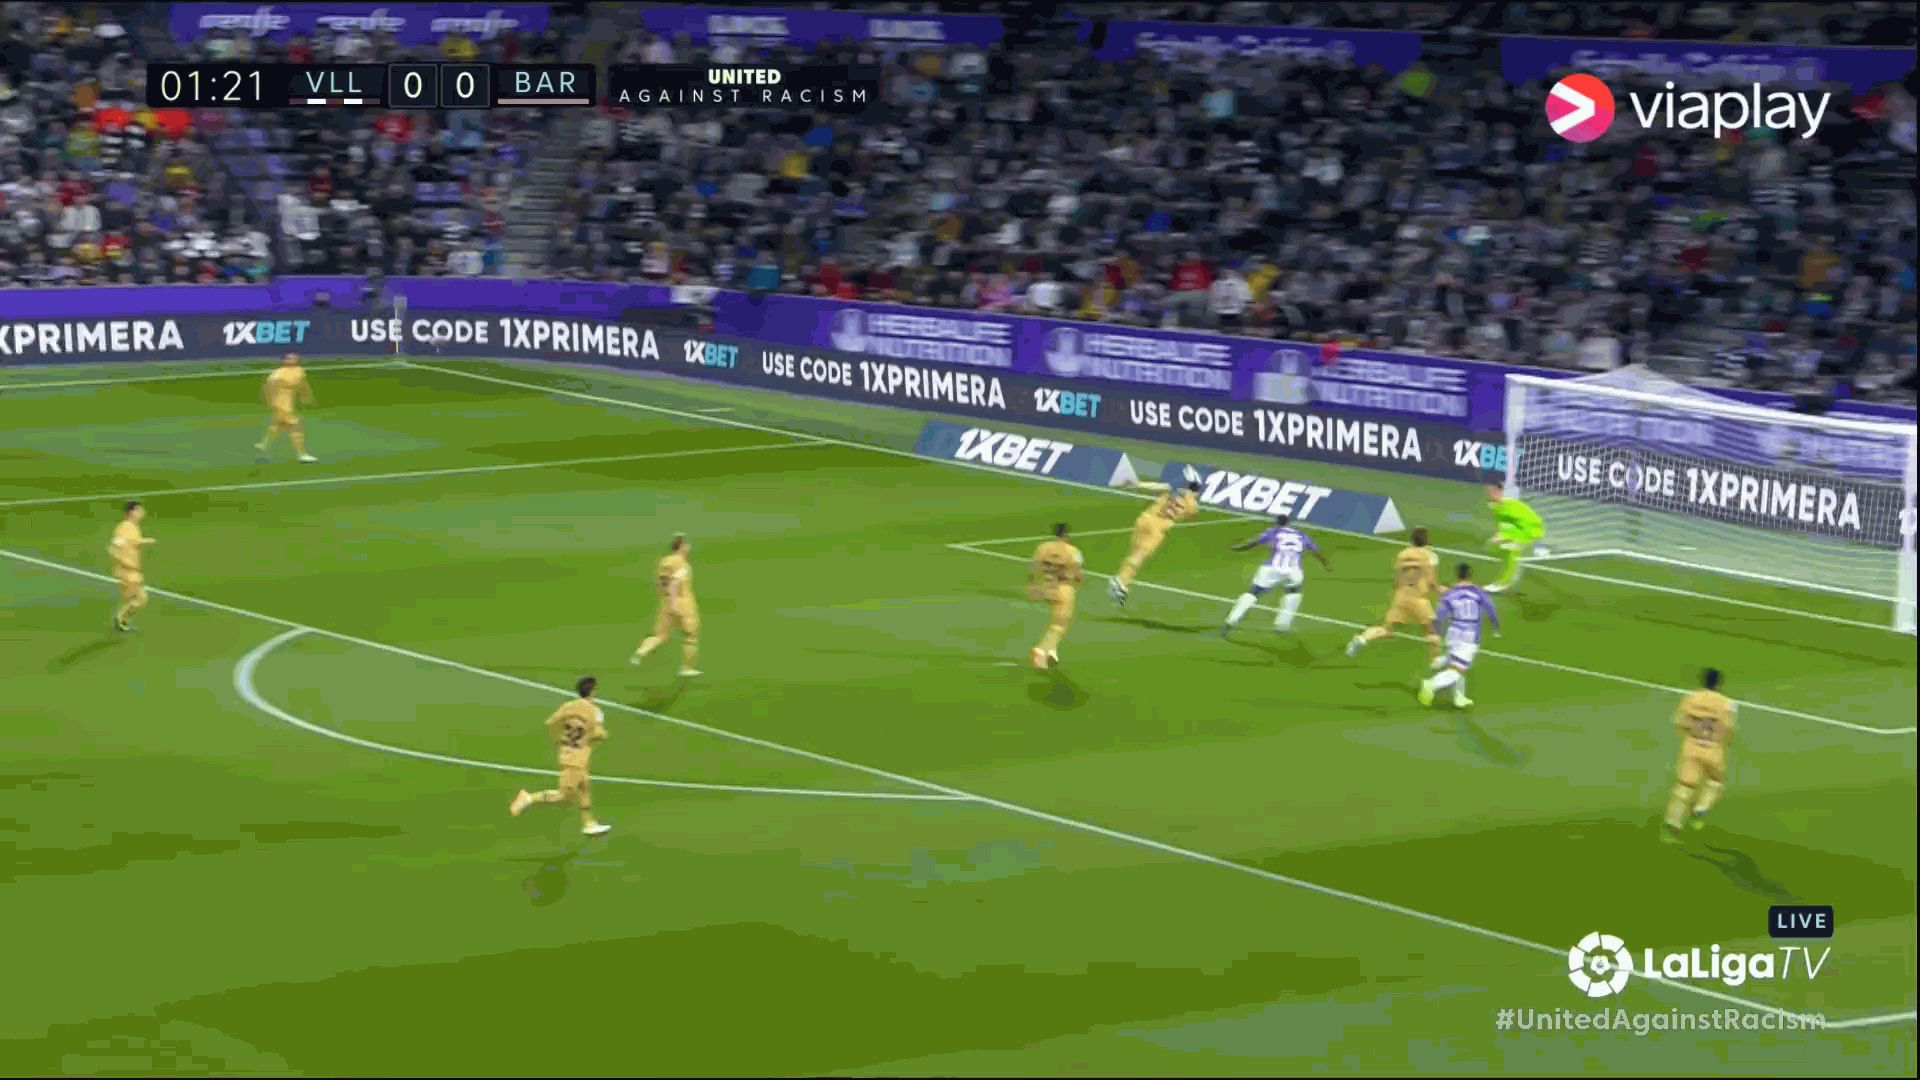 WATCH Nightmare start for Barcelona as Real Valladolid take the lead inside 2 minutes